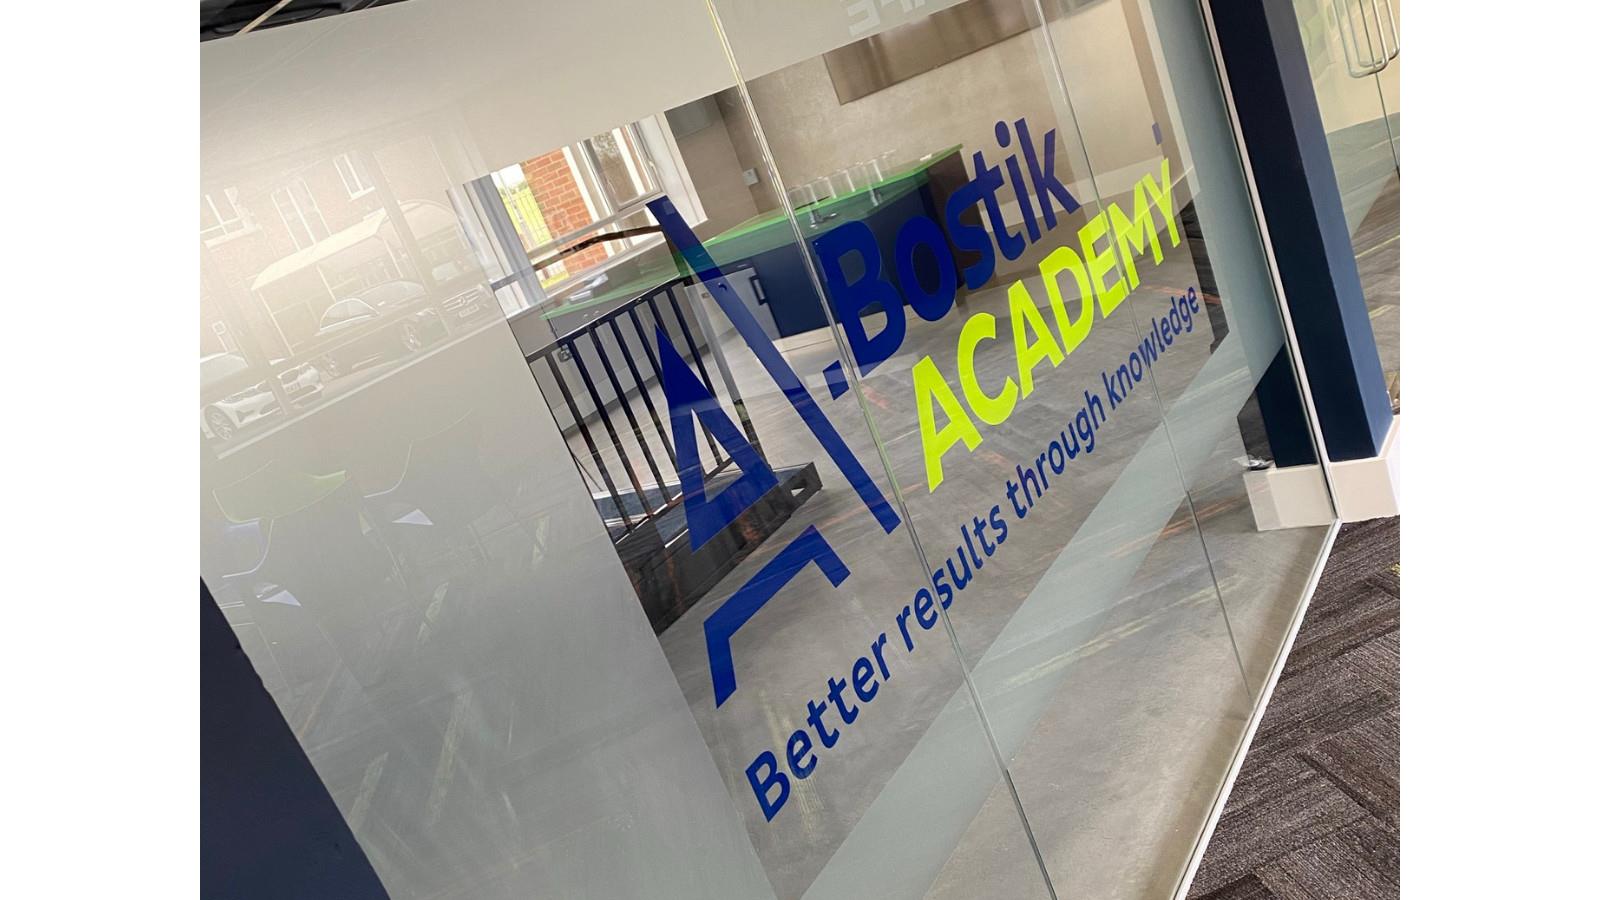 Bostik opens new state-of-the-art training facility image